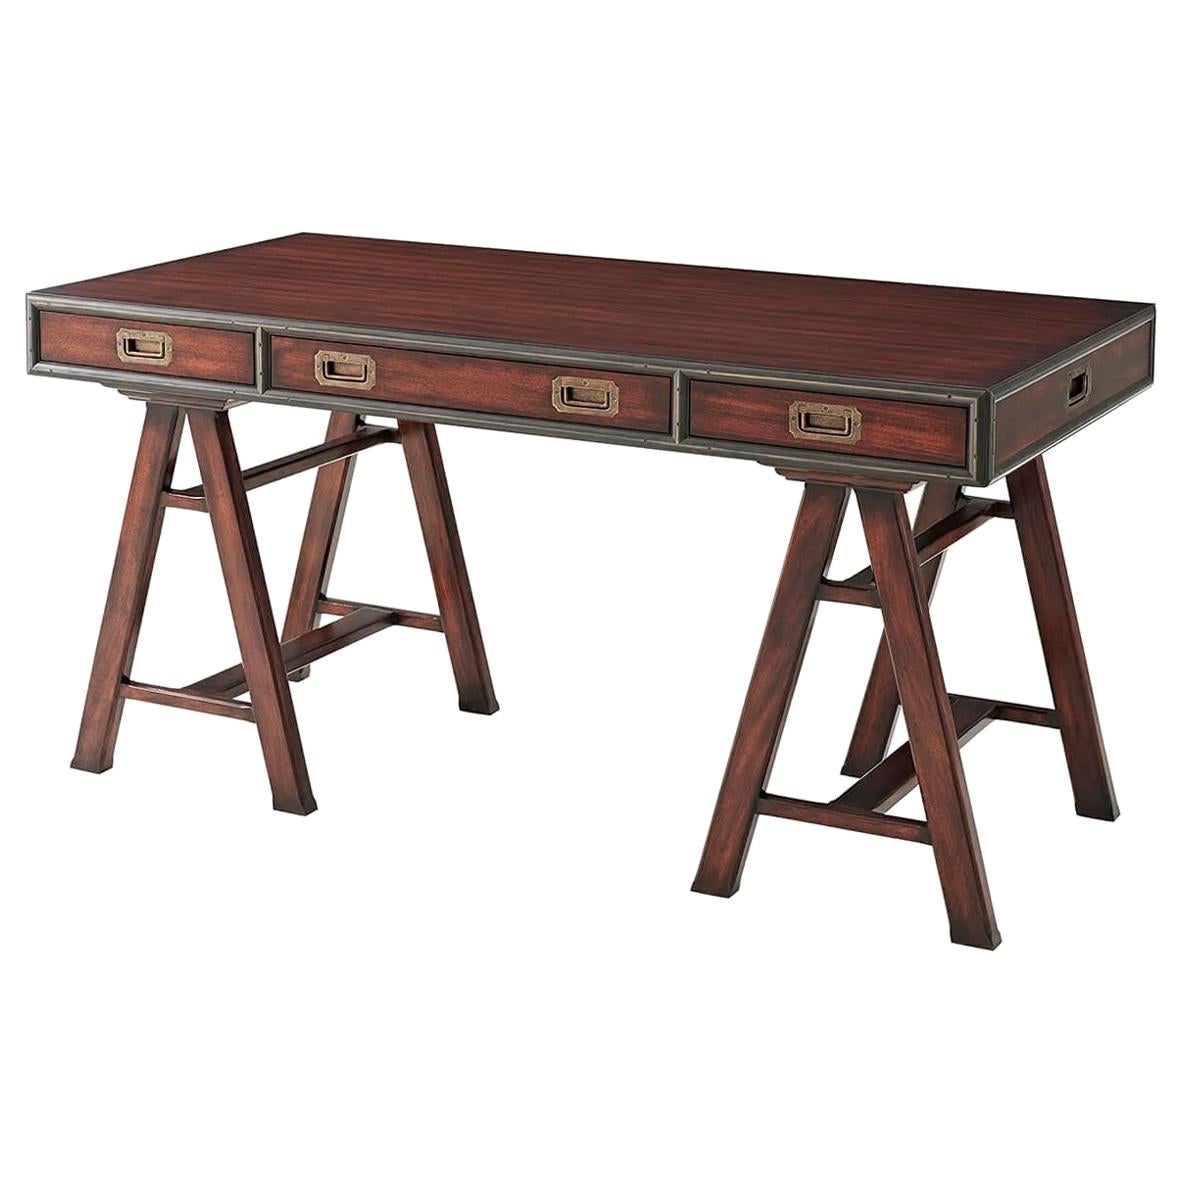 Campaign Style Writing Table